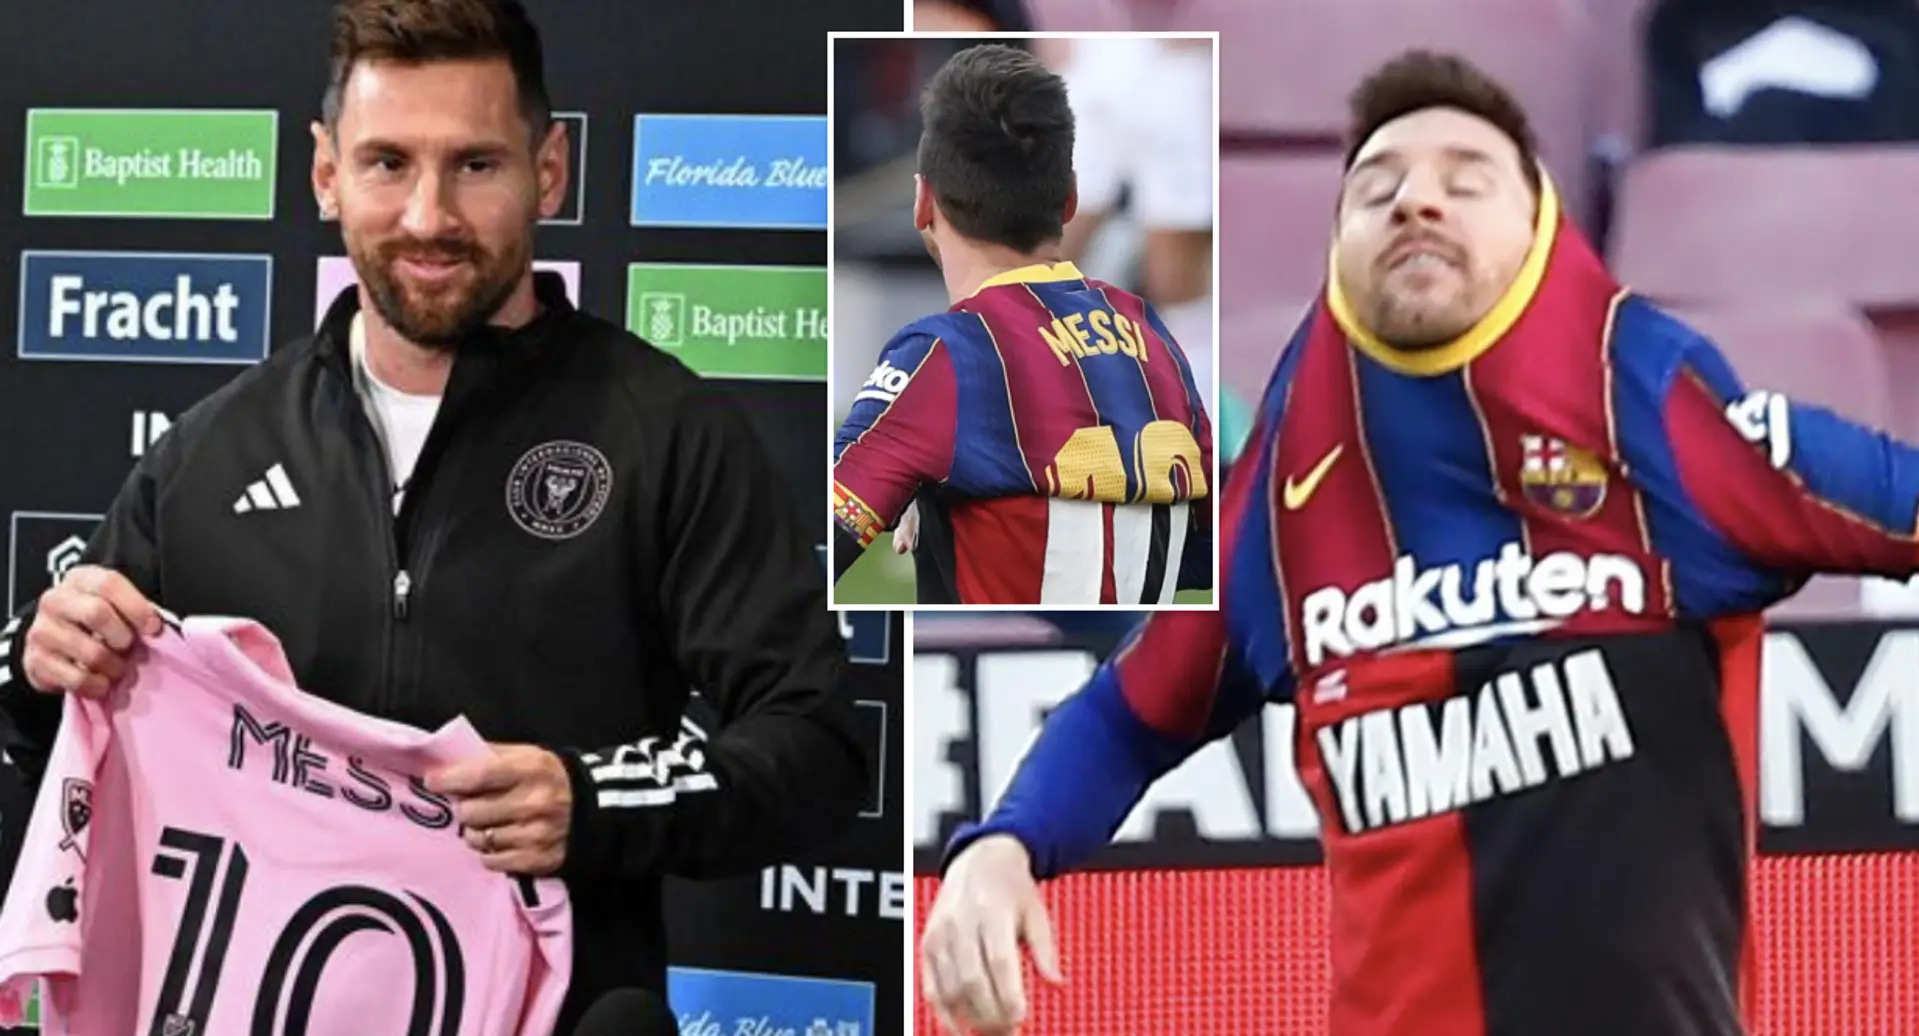 Leo Messi poised for emotional reunion with former club as Inter Miami announce surprise winter friendly